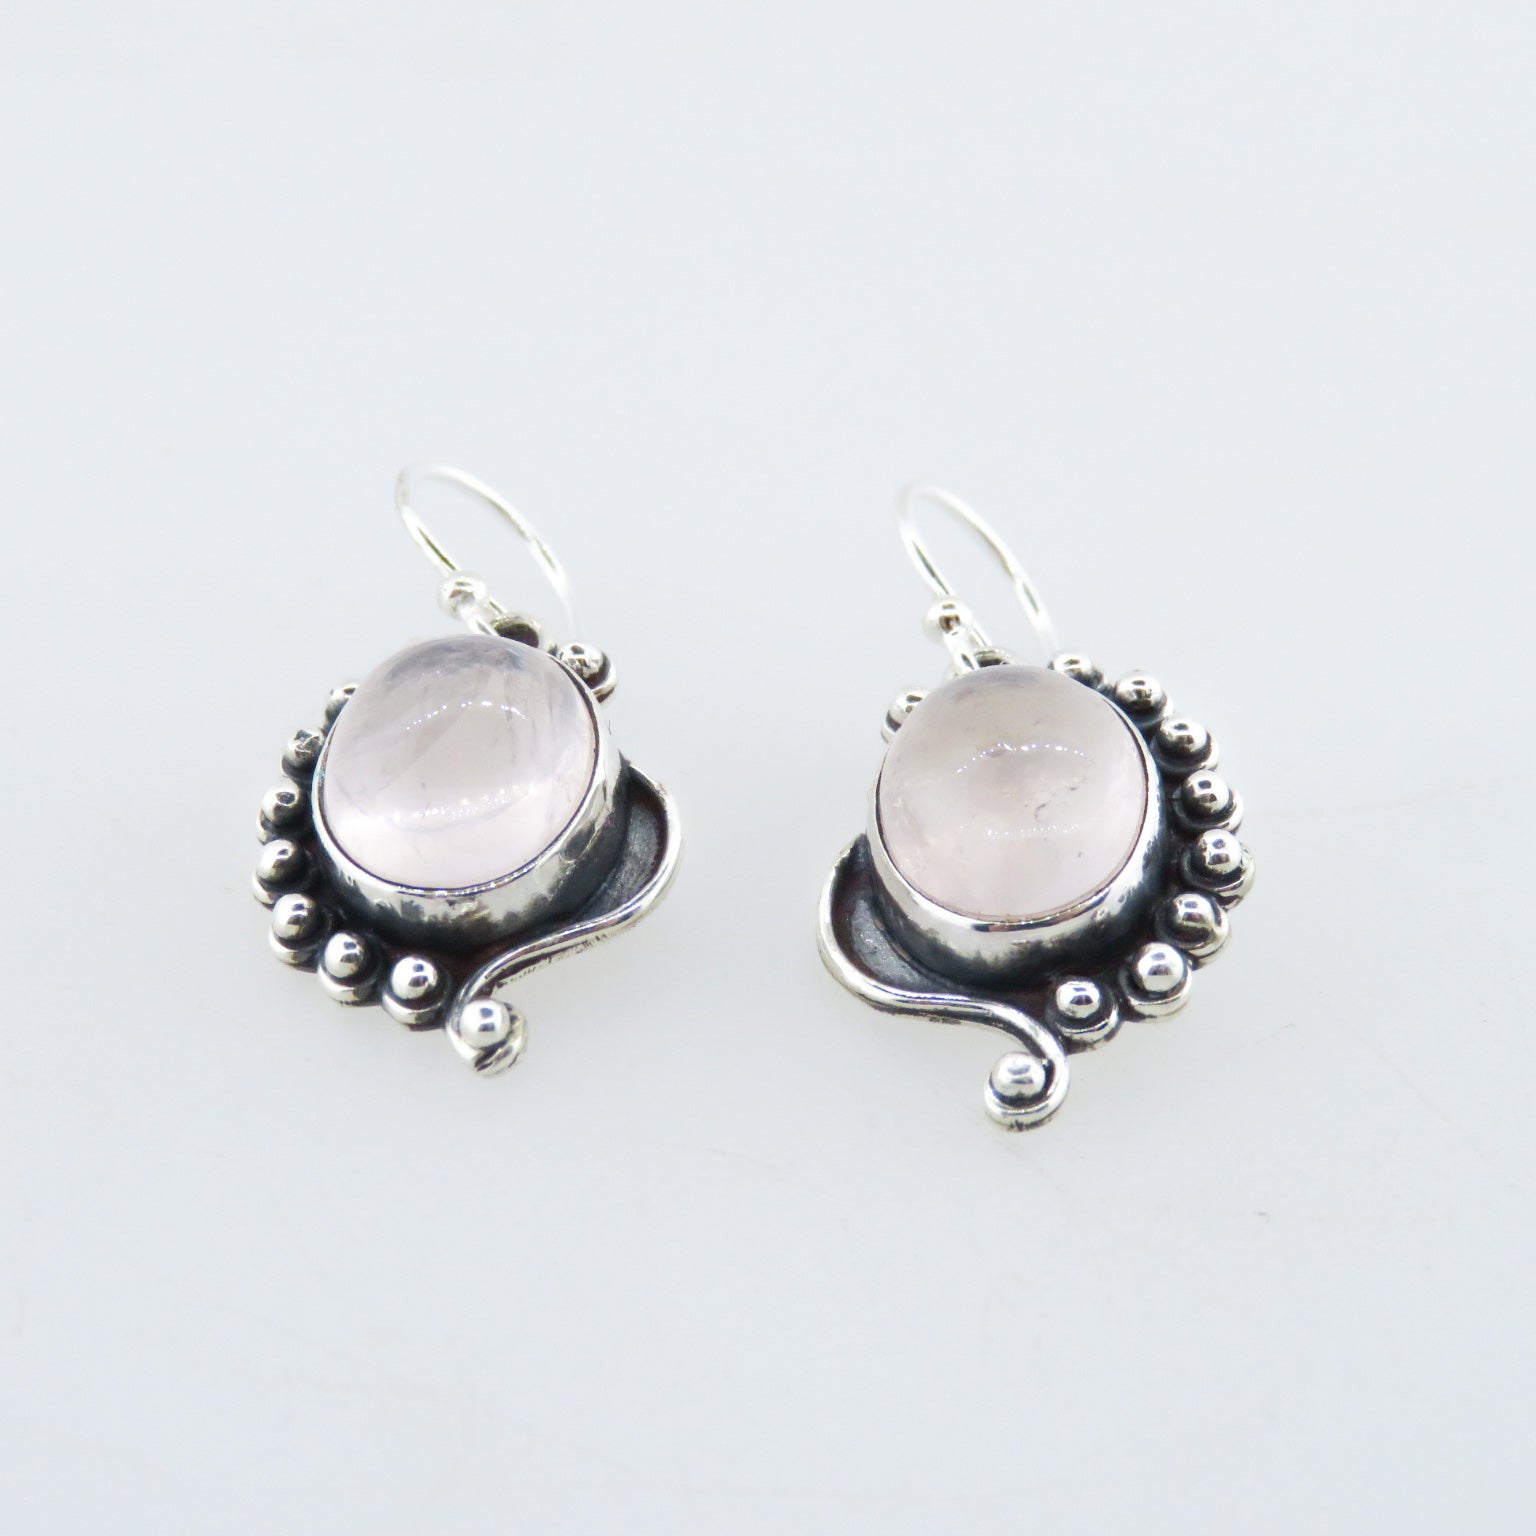 Rose Quartz Earrings with Sterling Silver